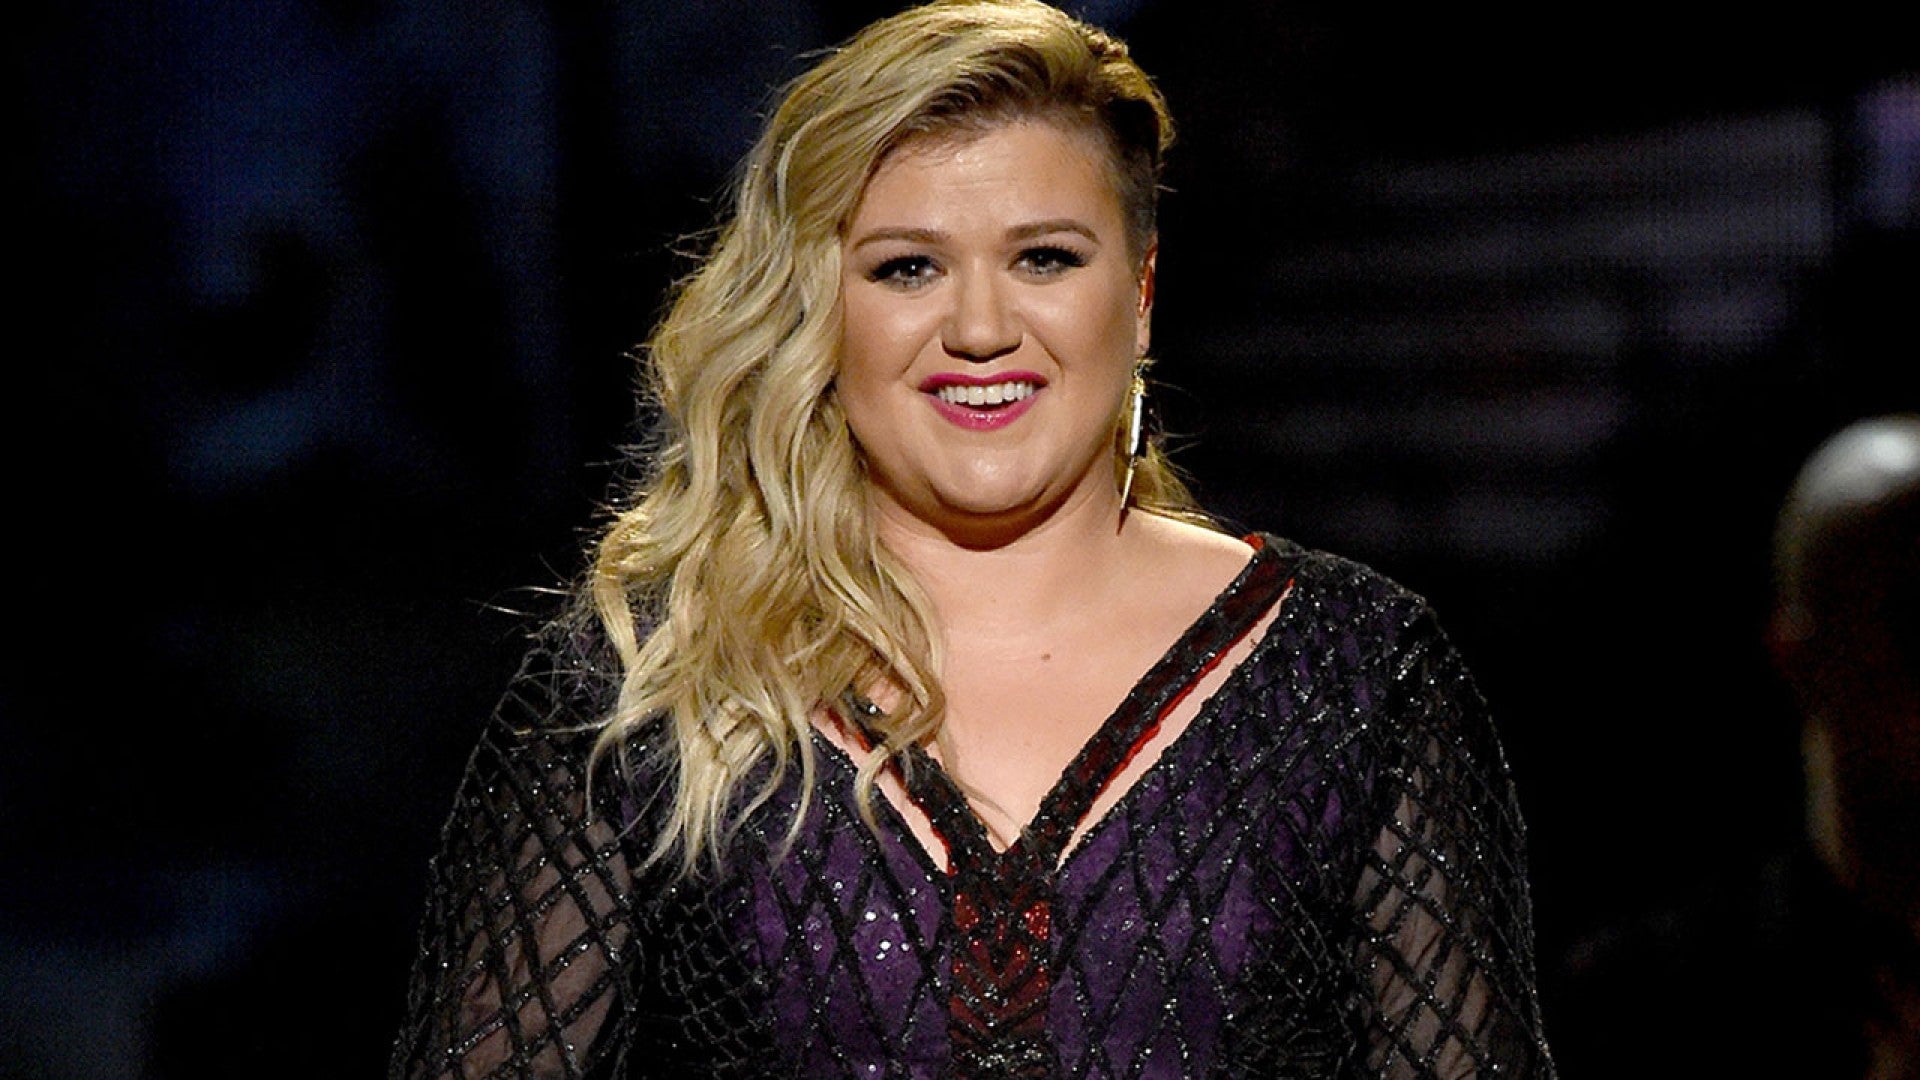 Kelly Clarkson Hilariously Forgets The Lyrics To Her Own Songs While On Facebook Live Entertainment Tonight